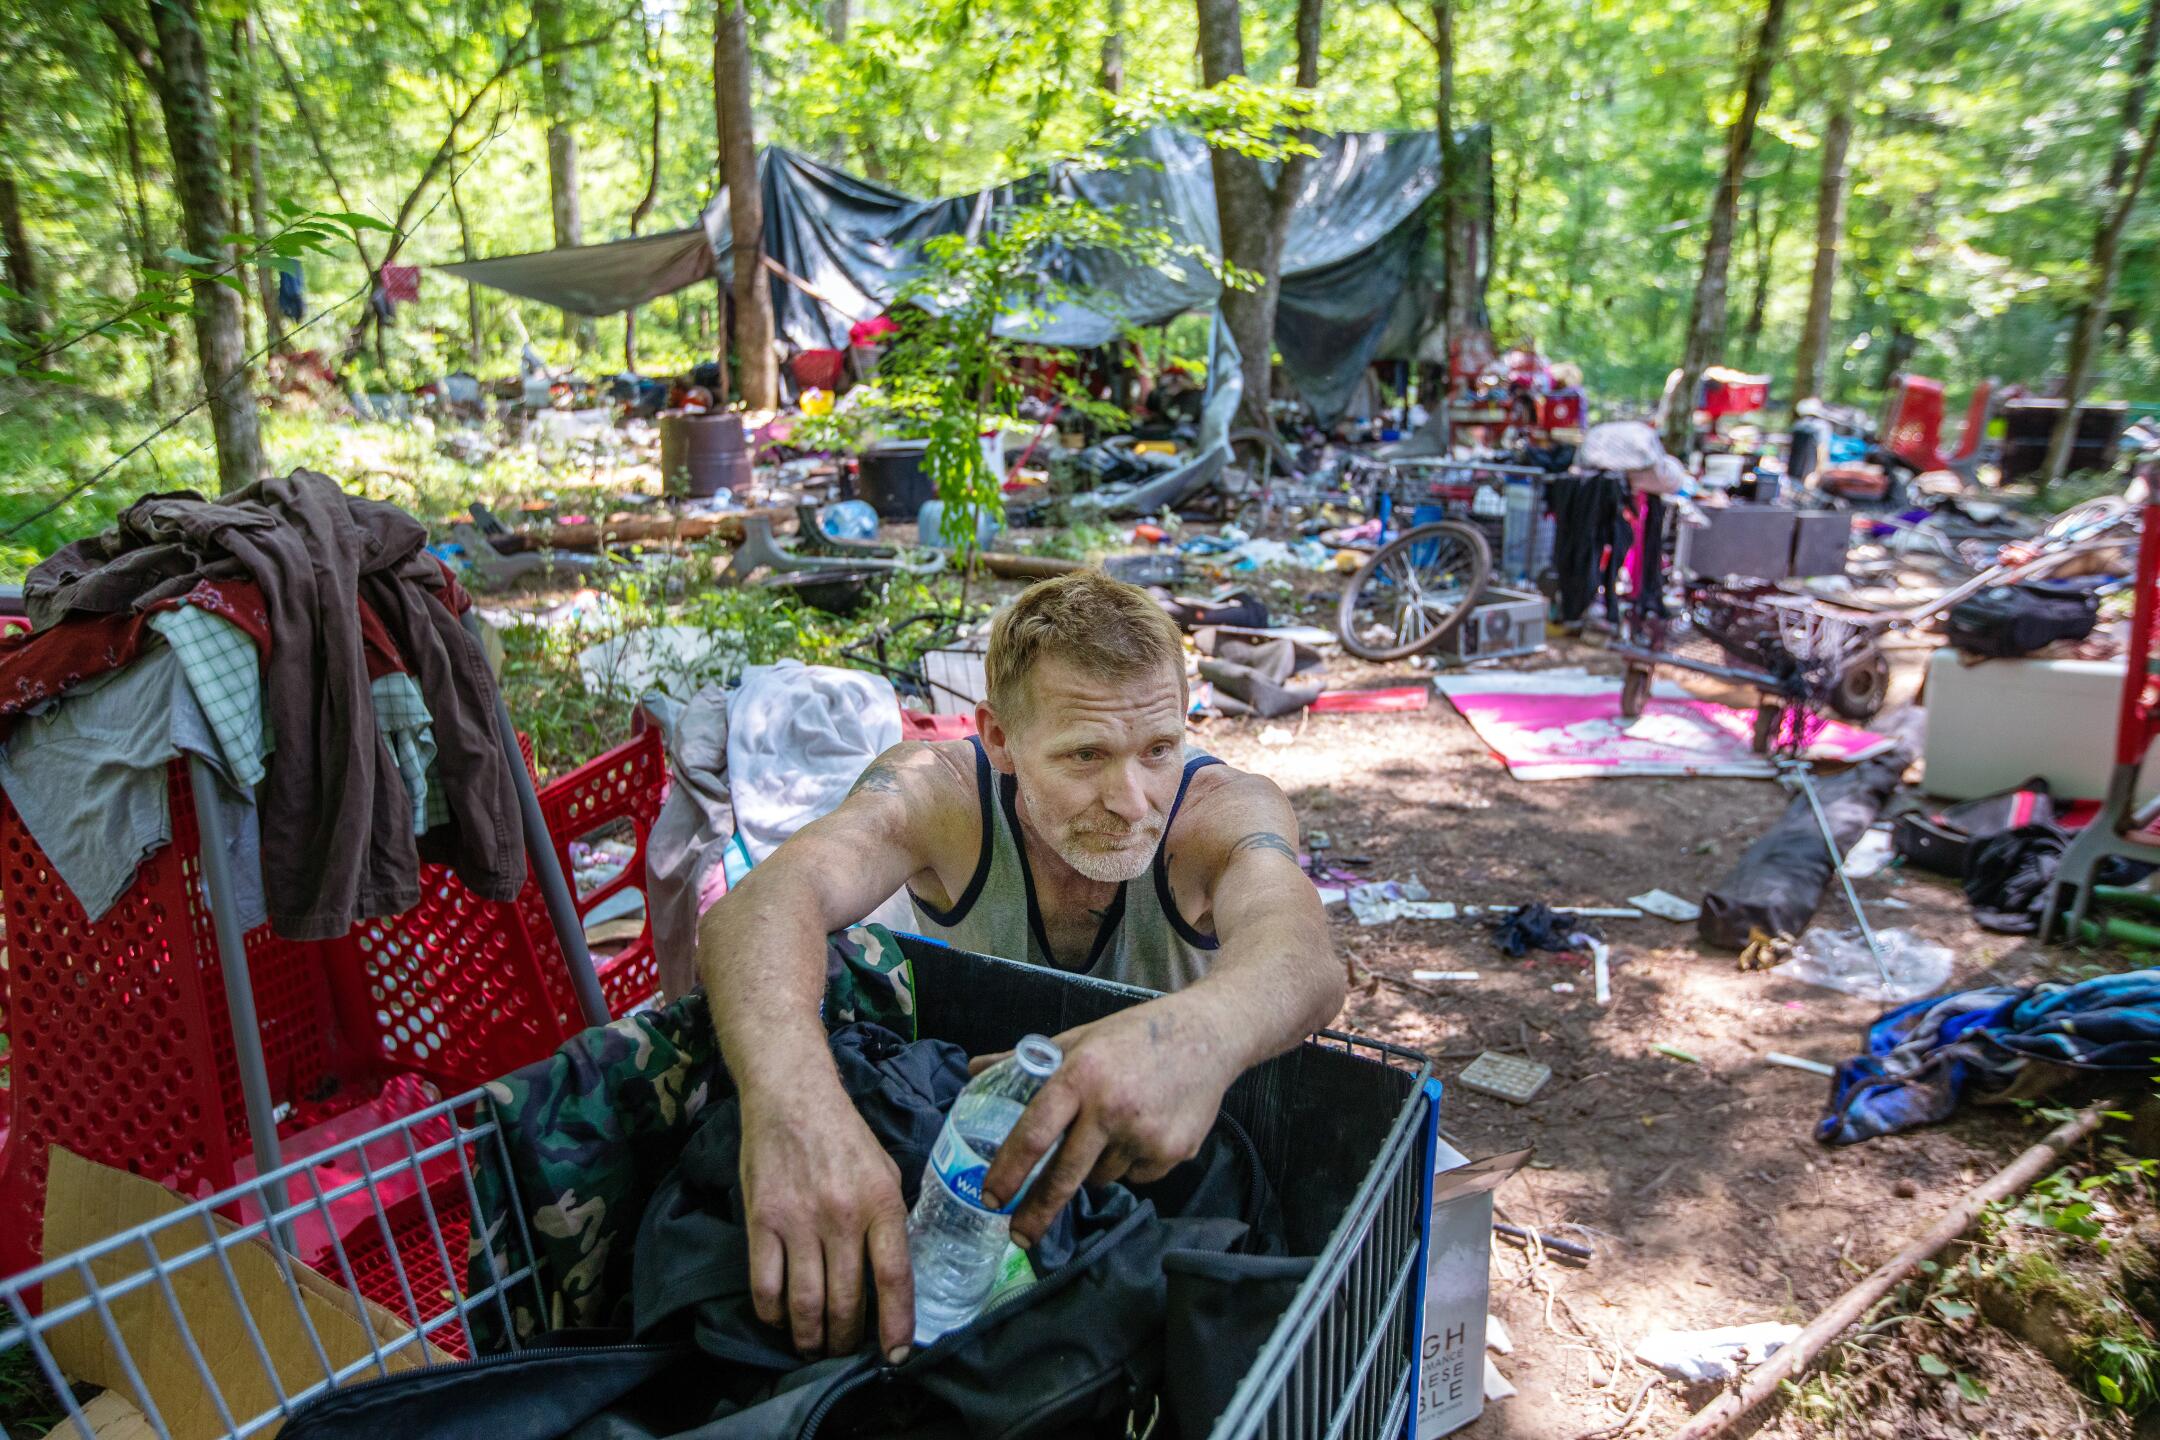 Mississippi has problems, but it's handling homelessness better than L